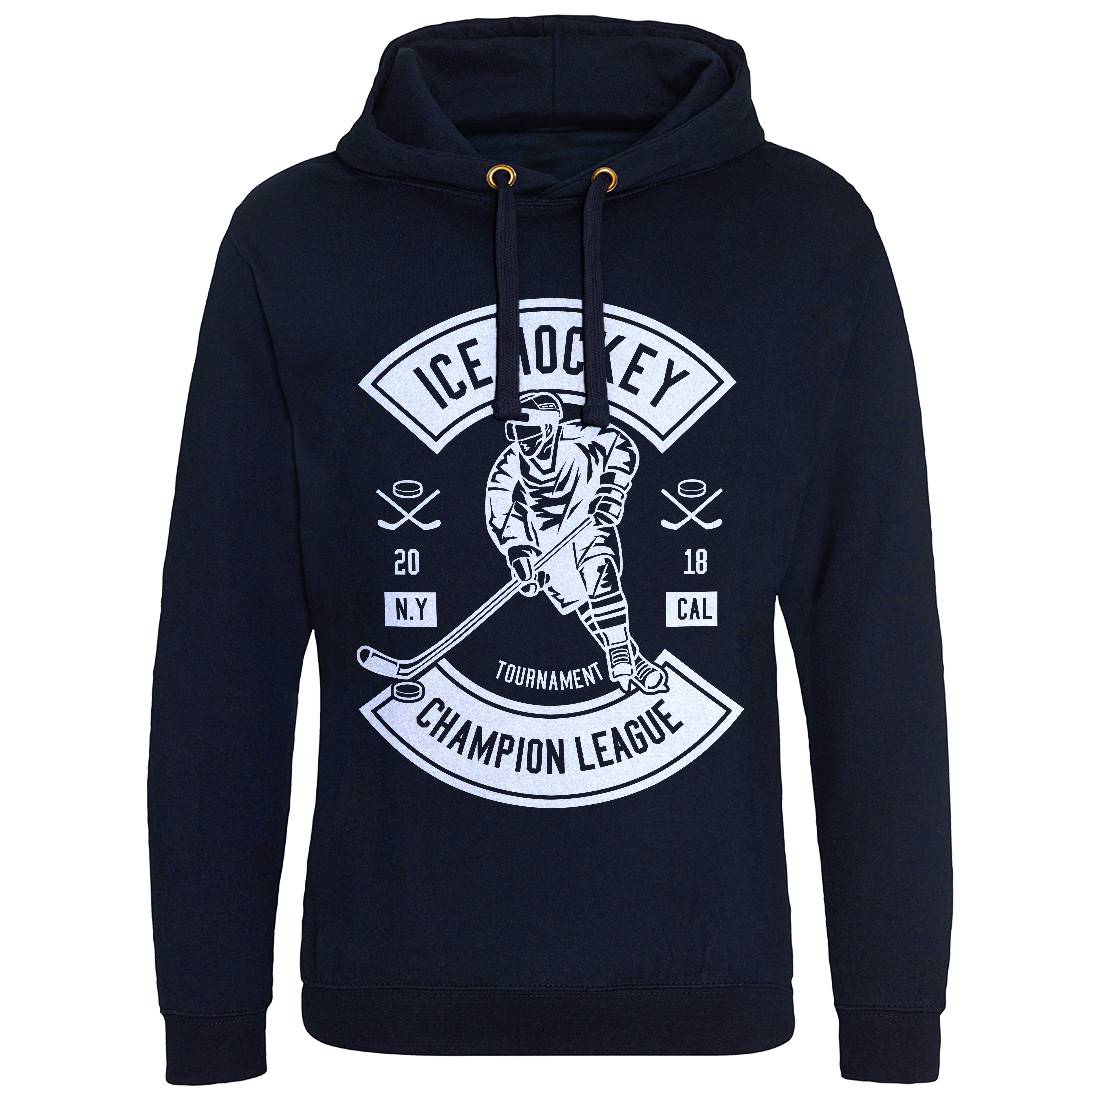 Ice Hockey Champion League Mens Hoodie Without Pocket Sport B564